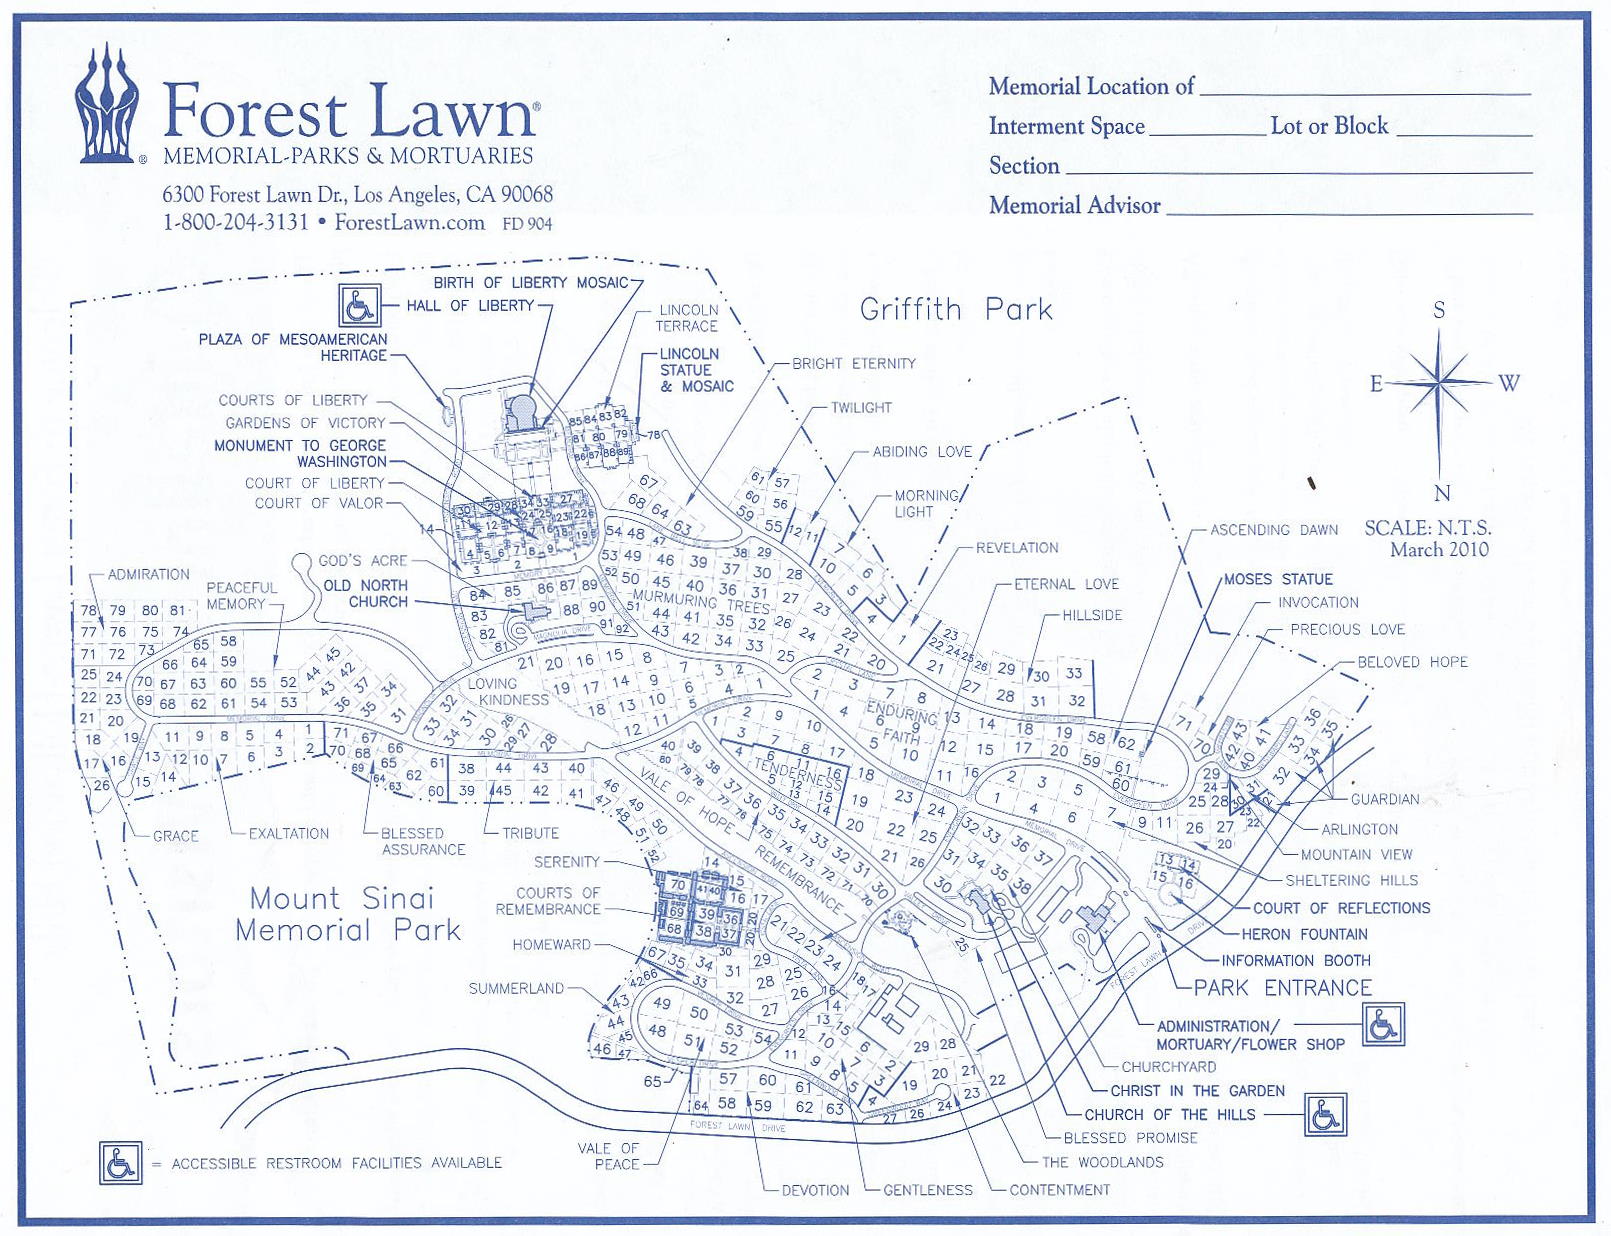 Cemetery map of Forest Lawn Memorial Park in Hollywood Hills, California